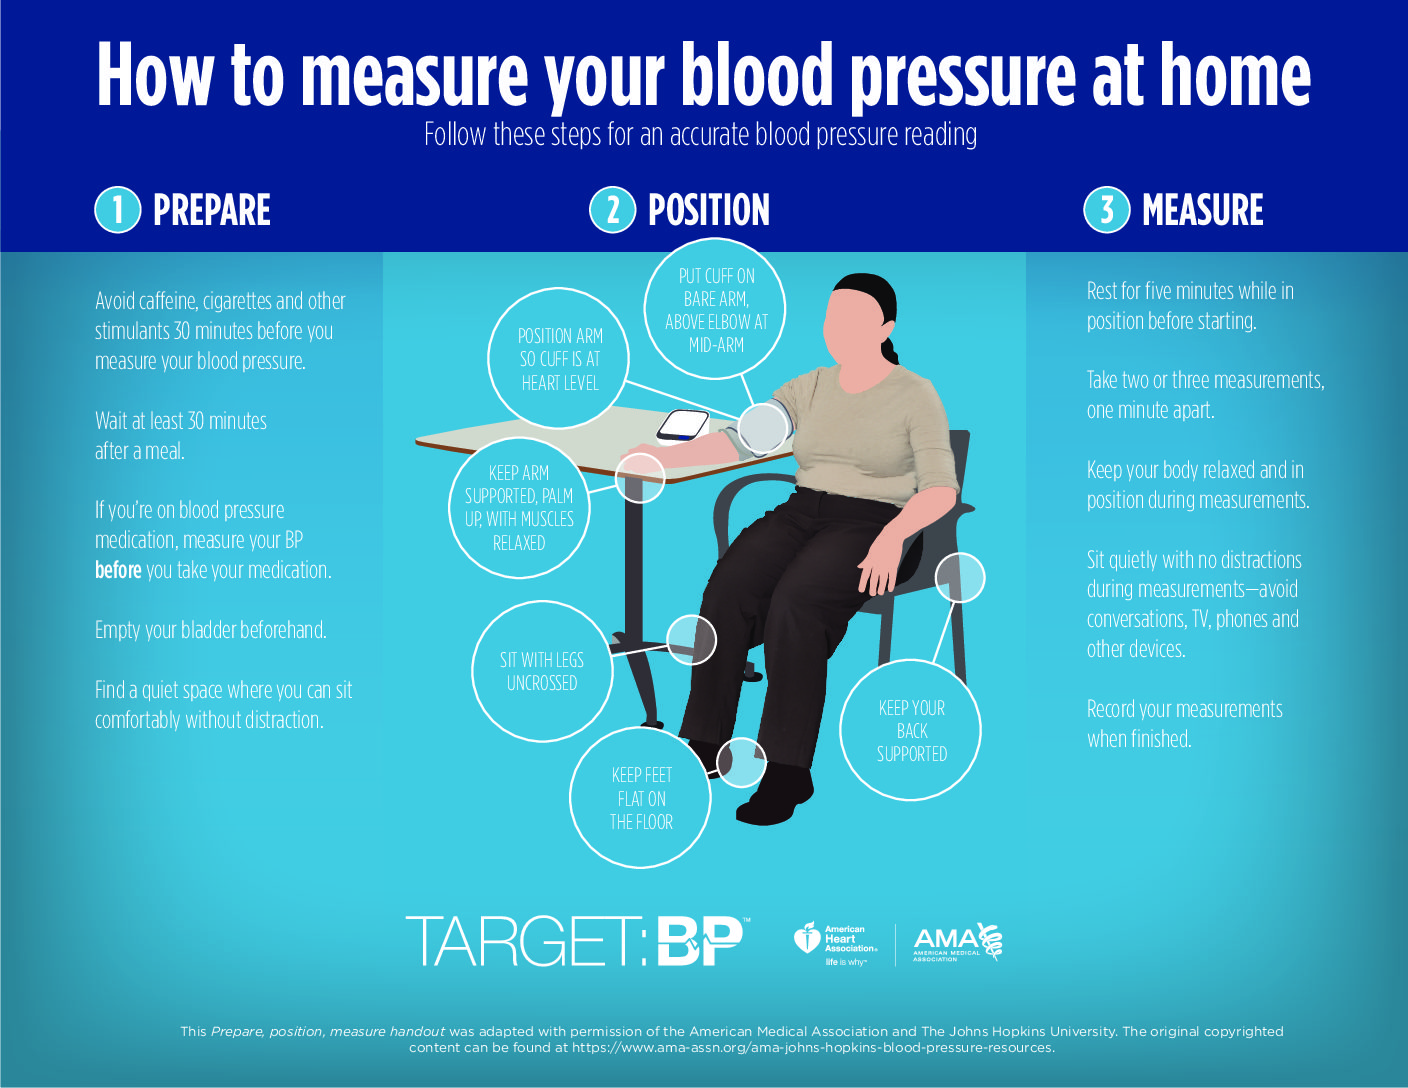 How To Take Blood Pressure At Home Without Equipment